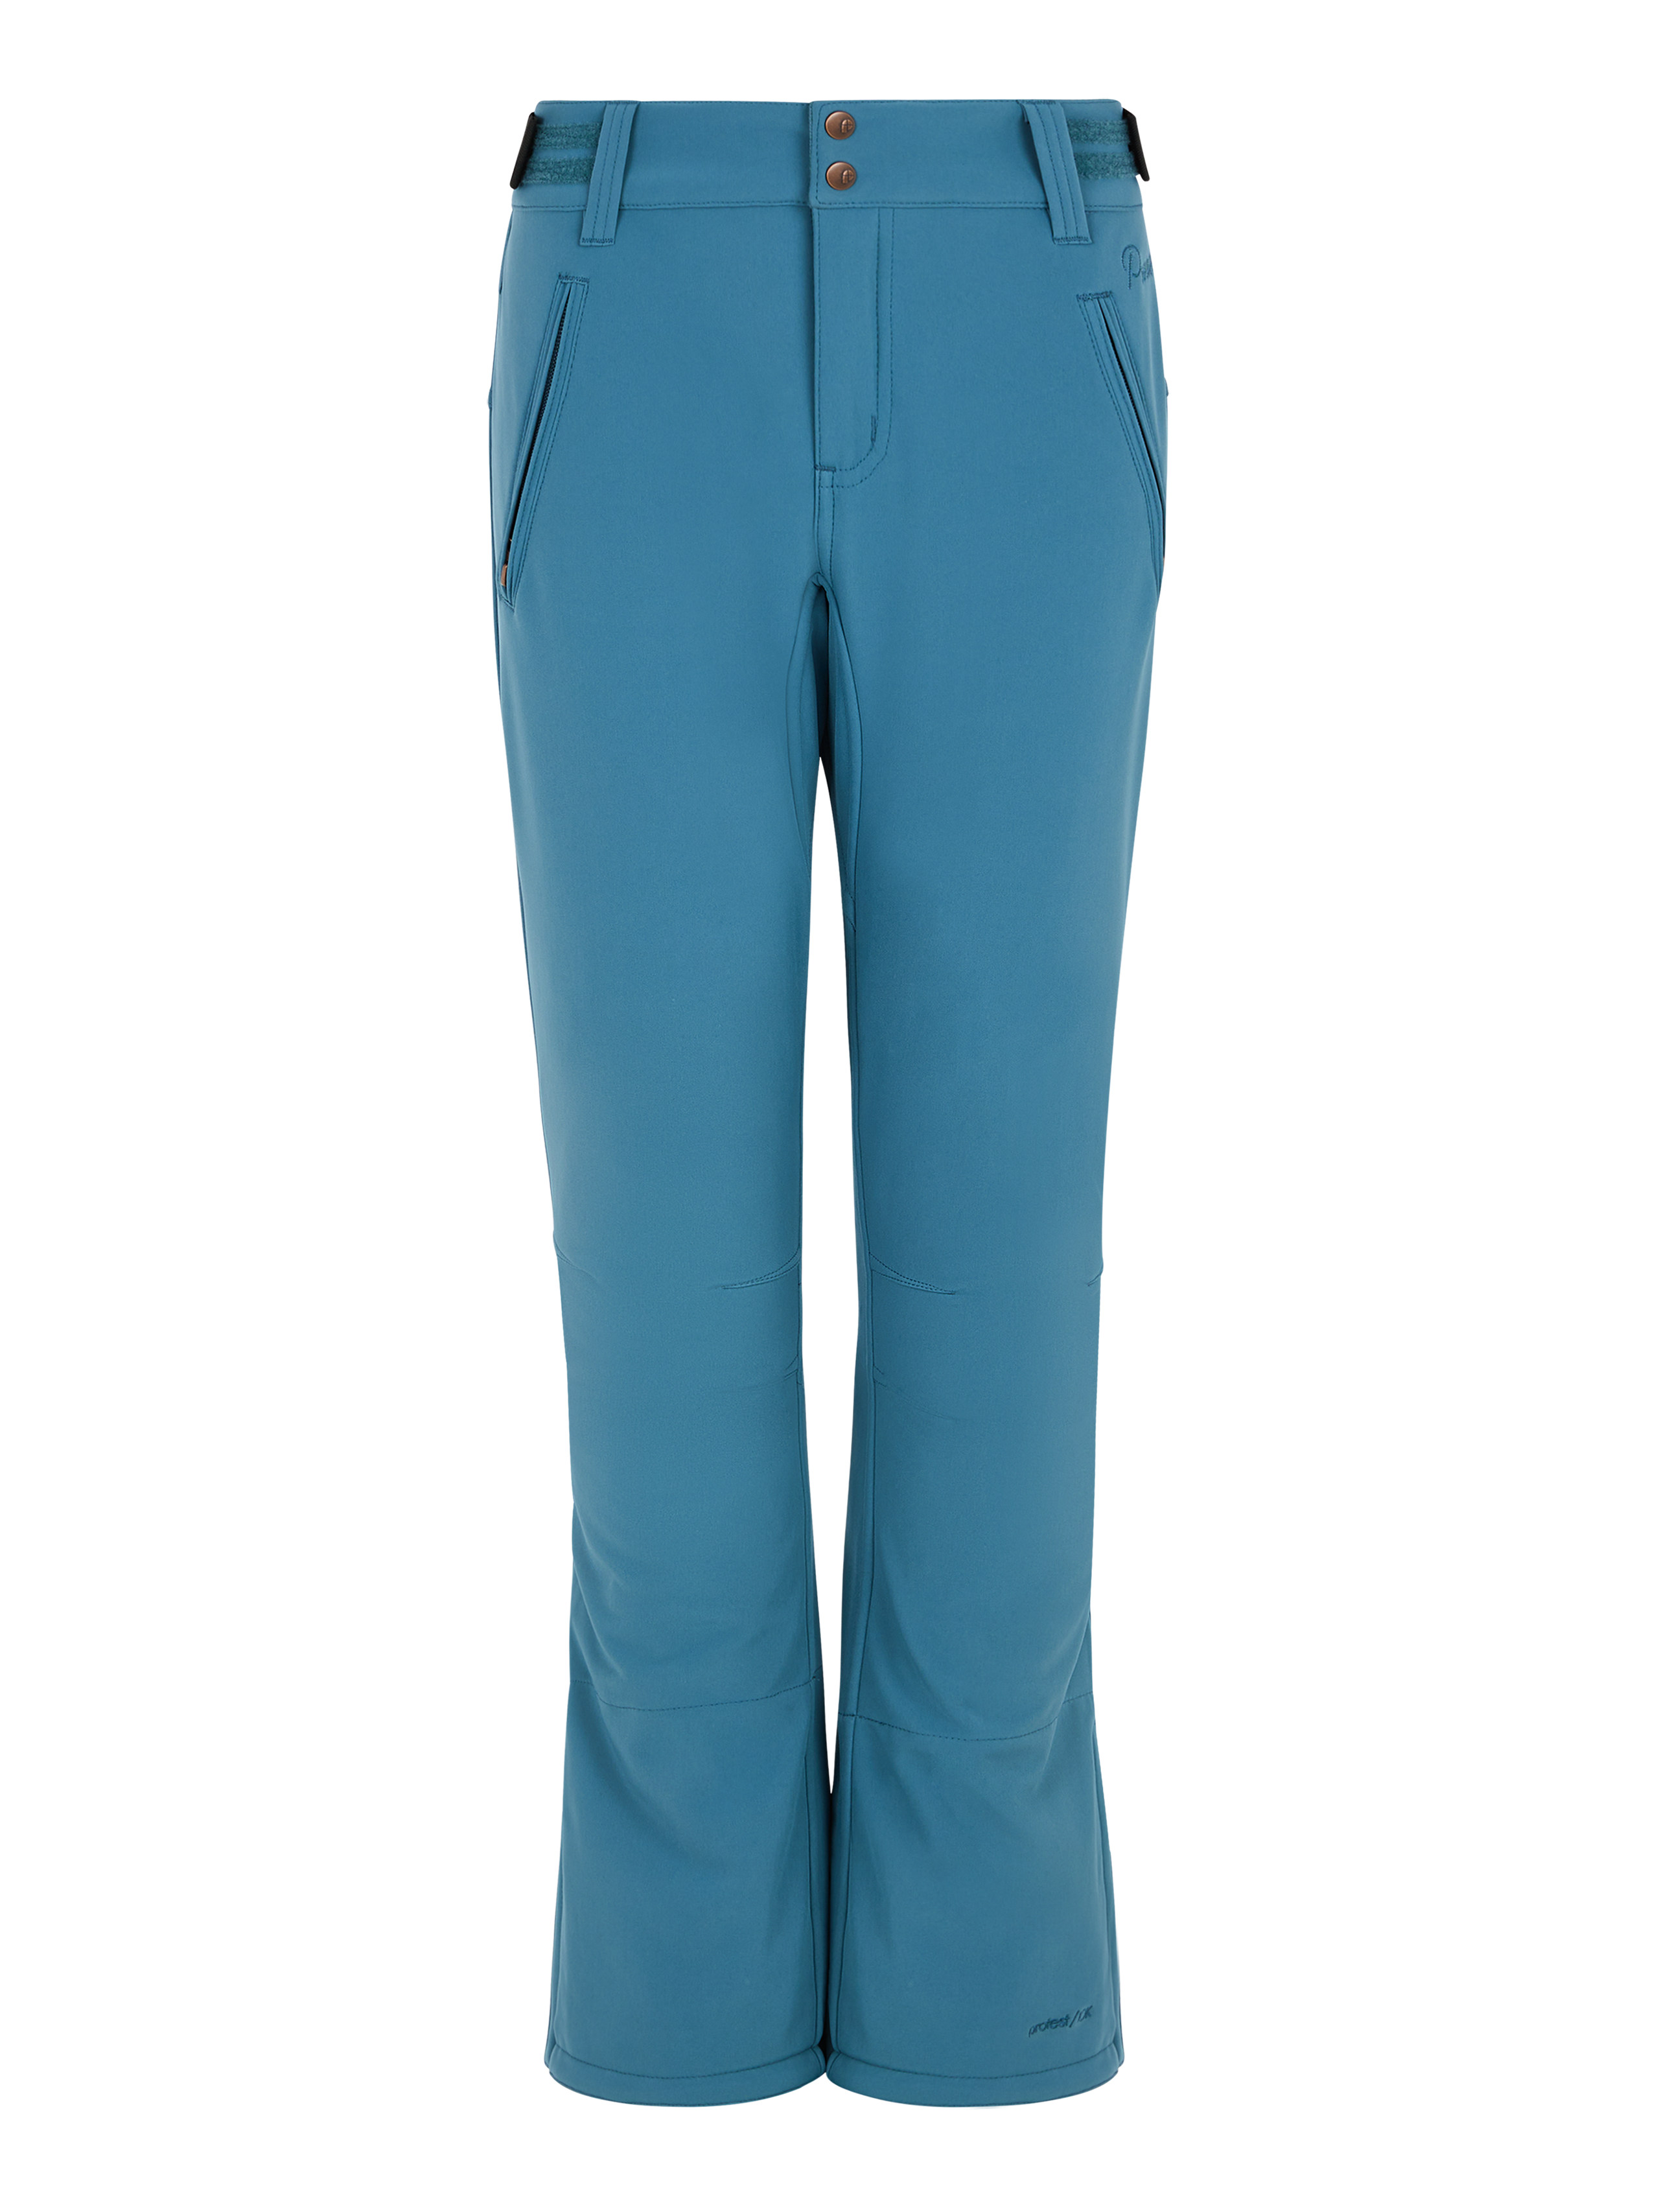 Protest Girls Lole Softshell Snowpants - Sample